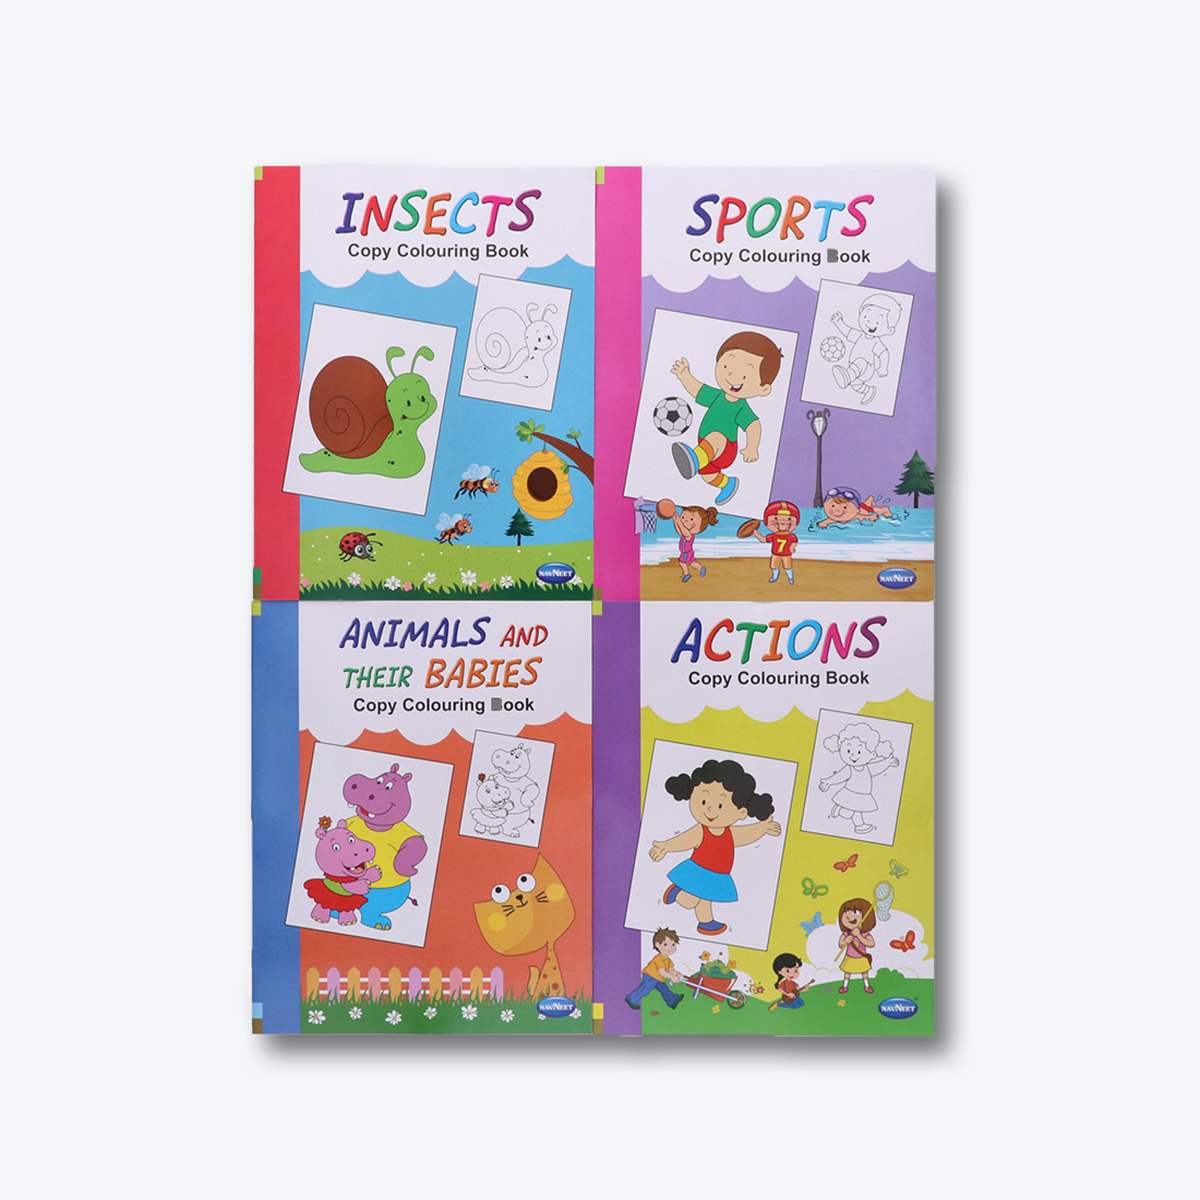 Navneet Theme Copy Colouring Book - Set of 4 books - Actions, Sports, Animals & their babies, Insects - Painting and colouring books for kids- Youva Stationery- 95+ pages